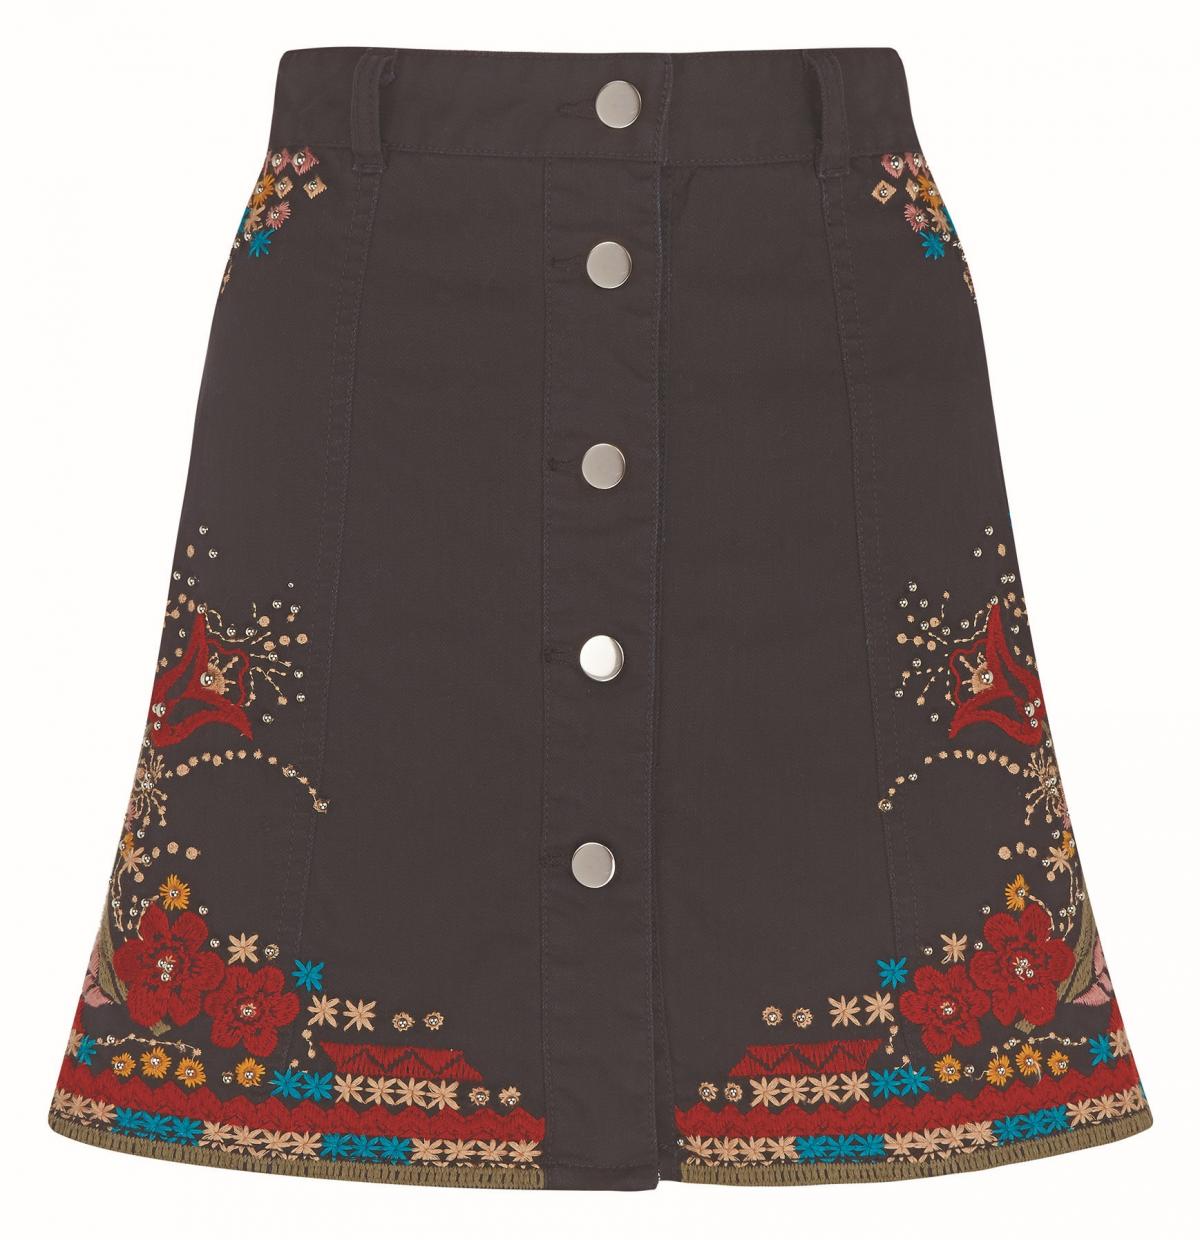 River Island, Limited Edition Embroidered Denim Skirt, £50